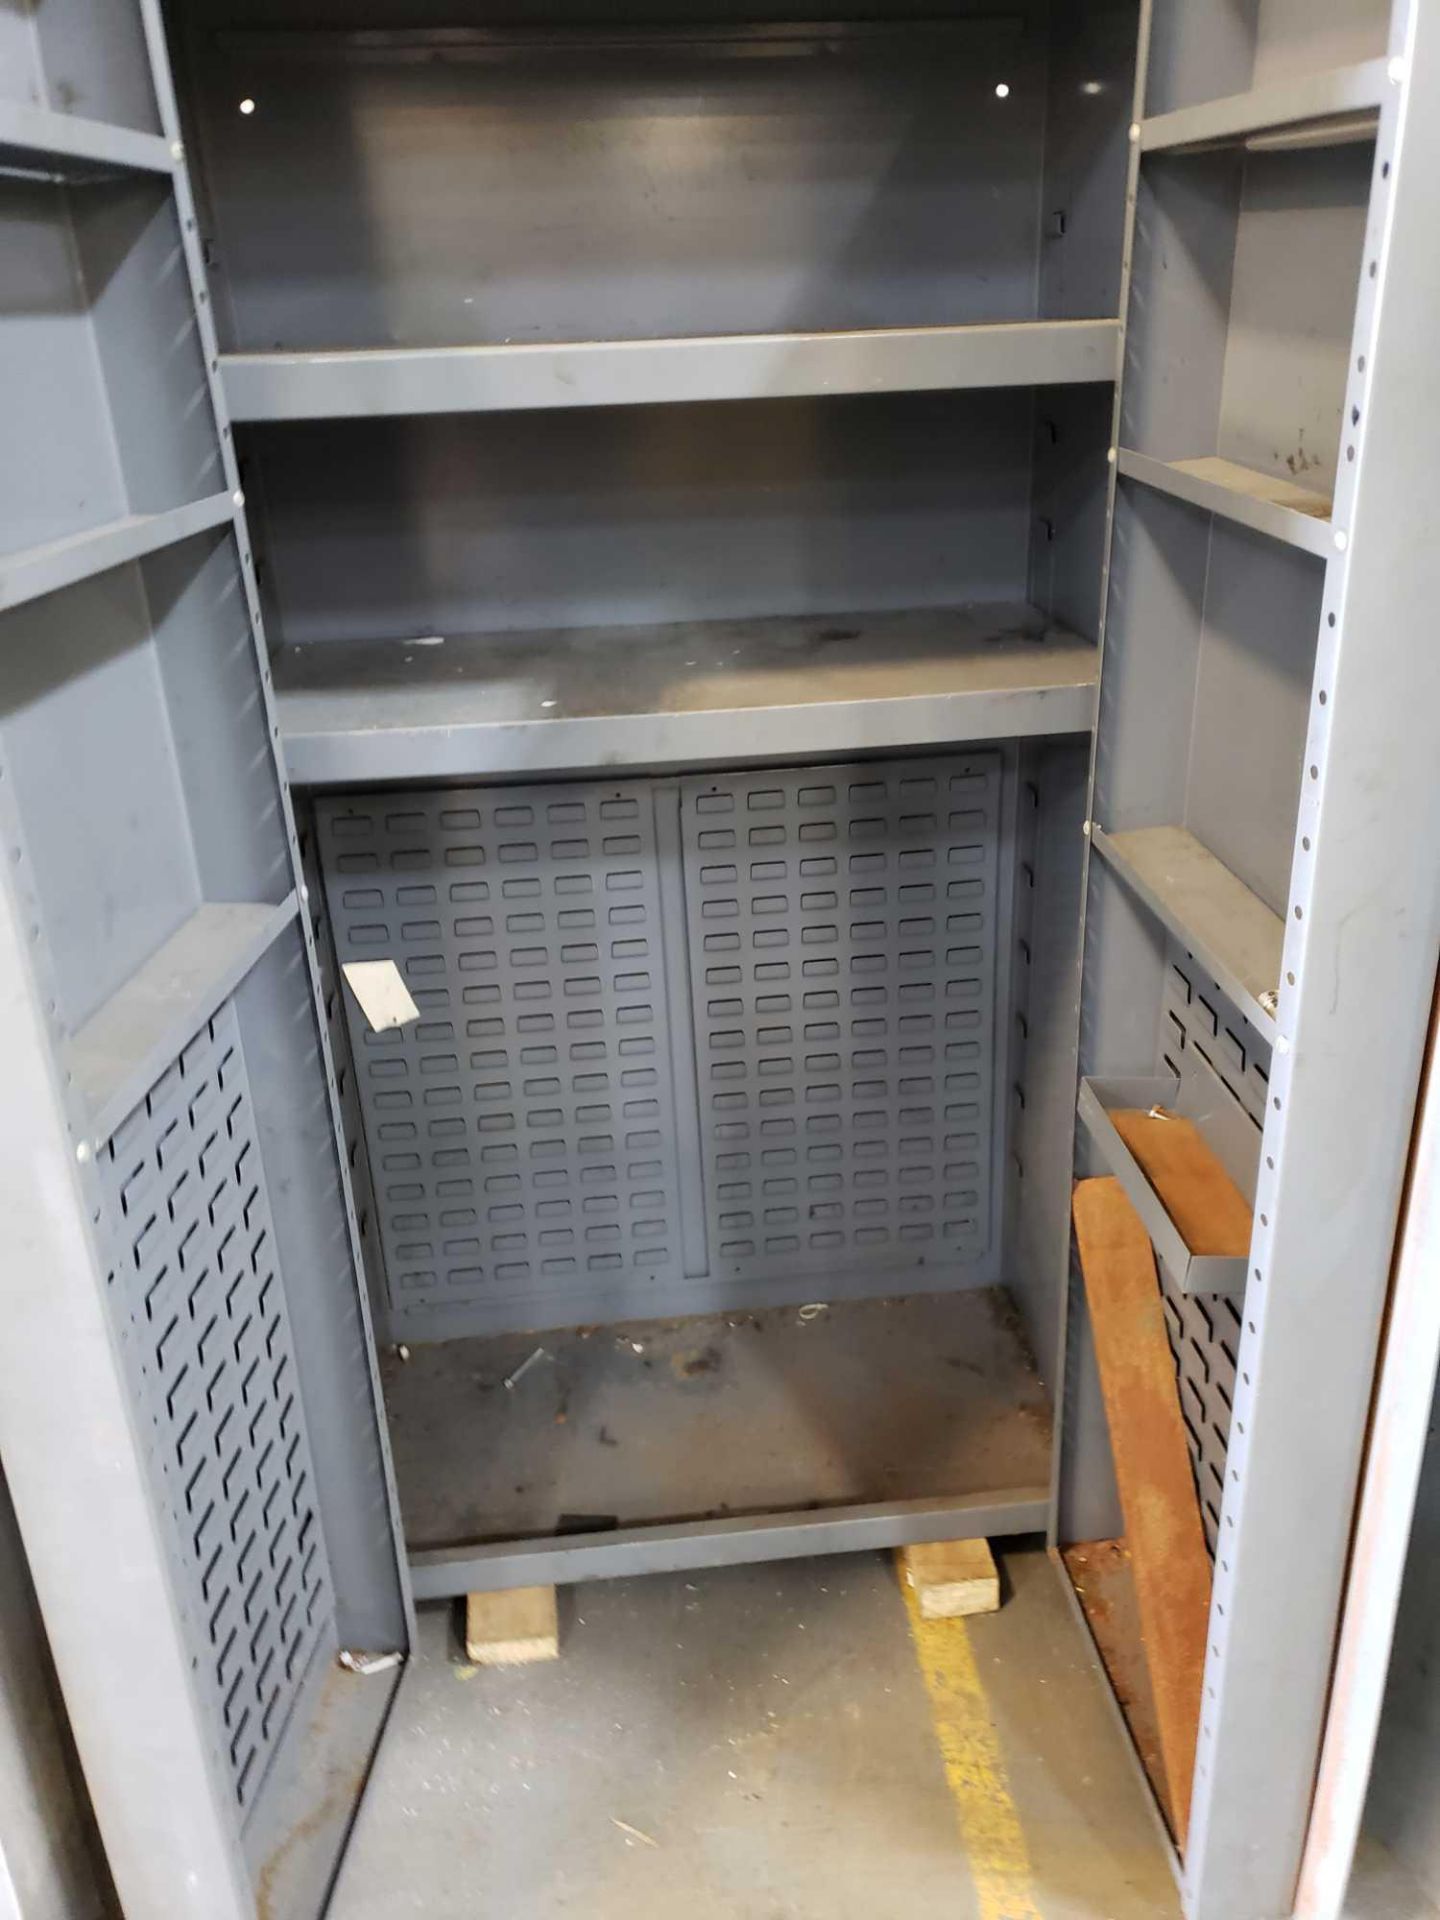 Heavy duty industrial cabinet for Akro bins. 72" tall x 38" wide x 24" deep. Appears to be equipto o - Image 2 of 2